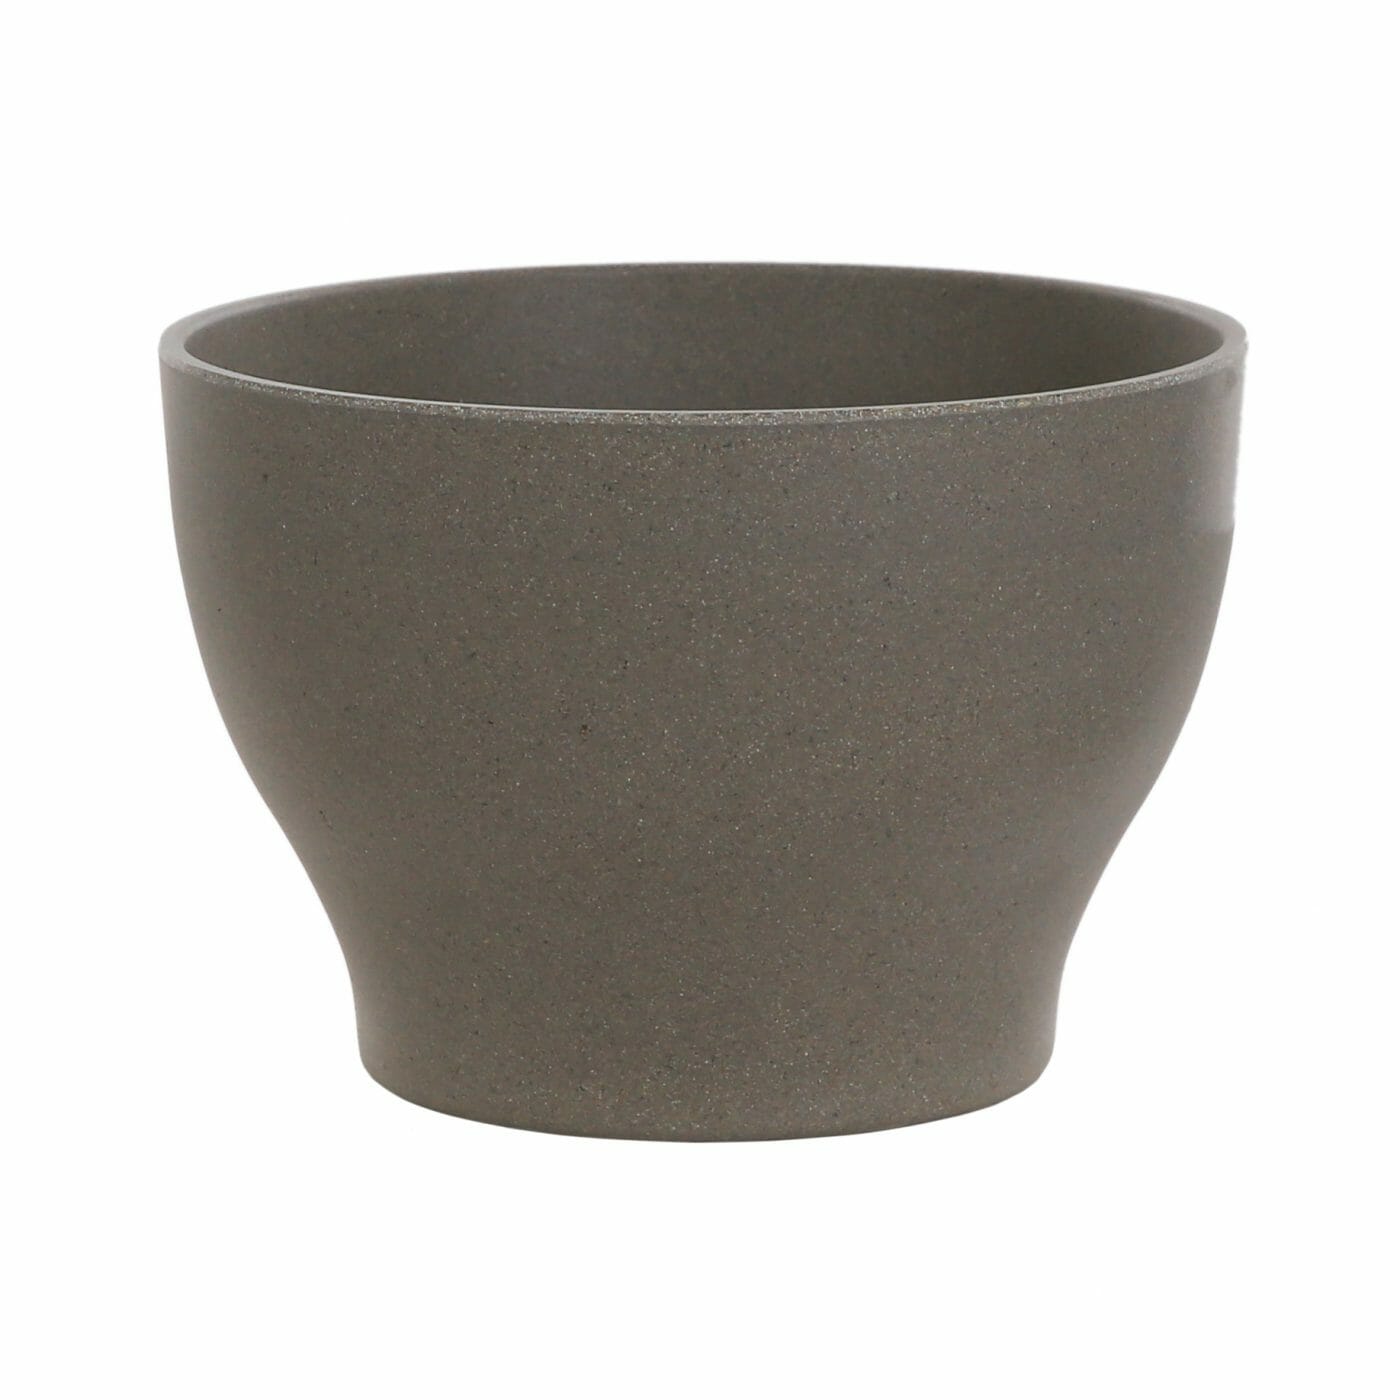 Woodlodge to launch a new collection of lightweight sustainable pots